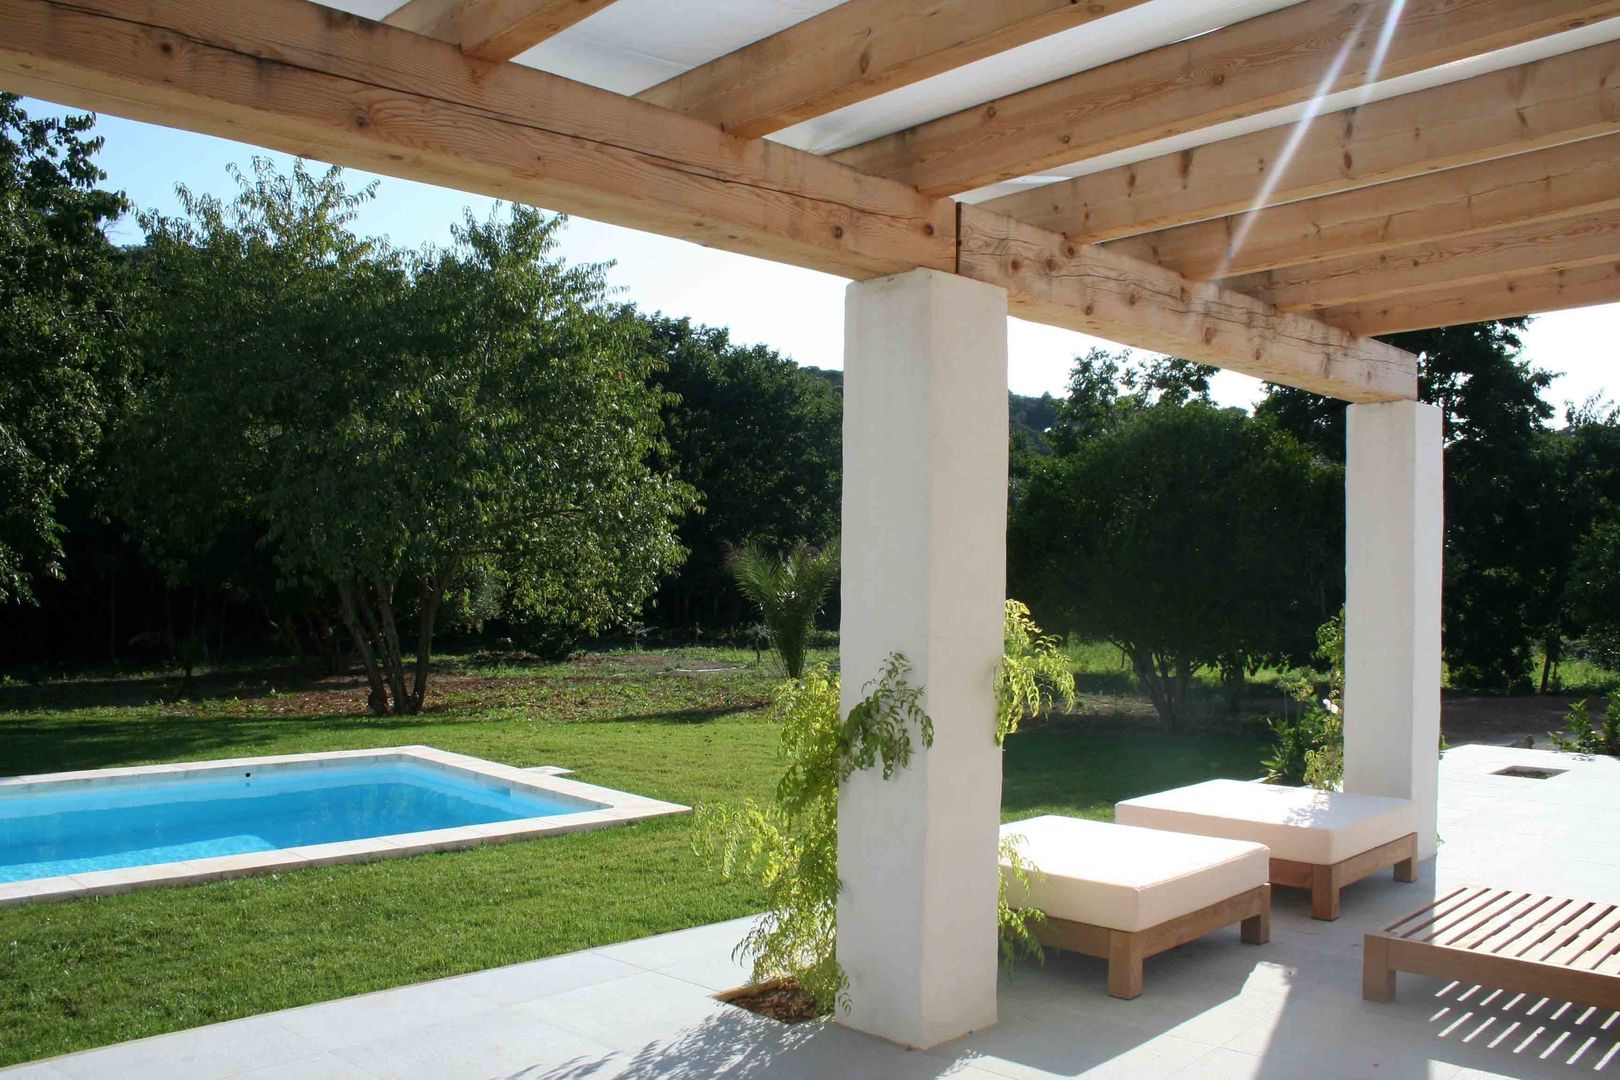 Terrace facing the garden with swimming pool FG ARQUITECTES Terrace